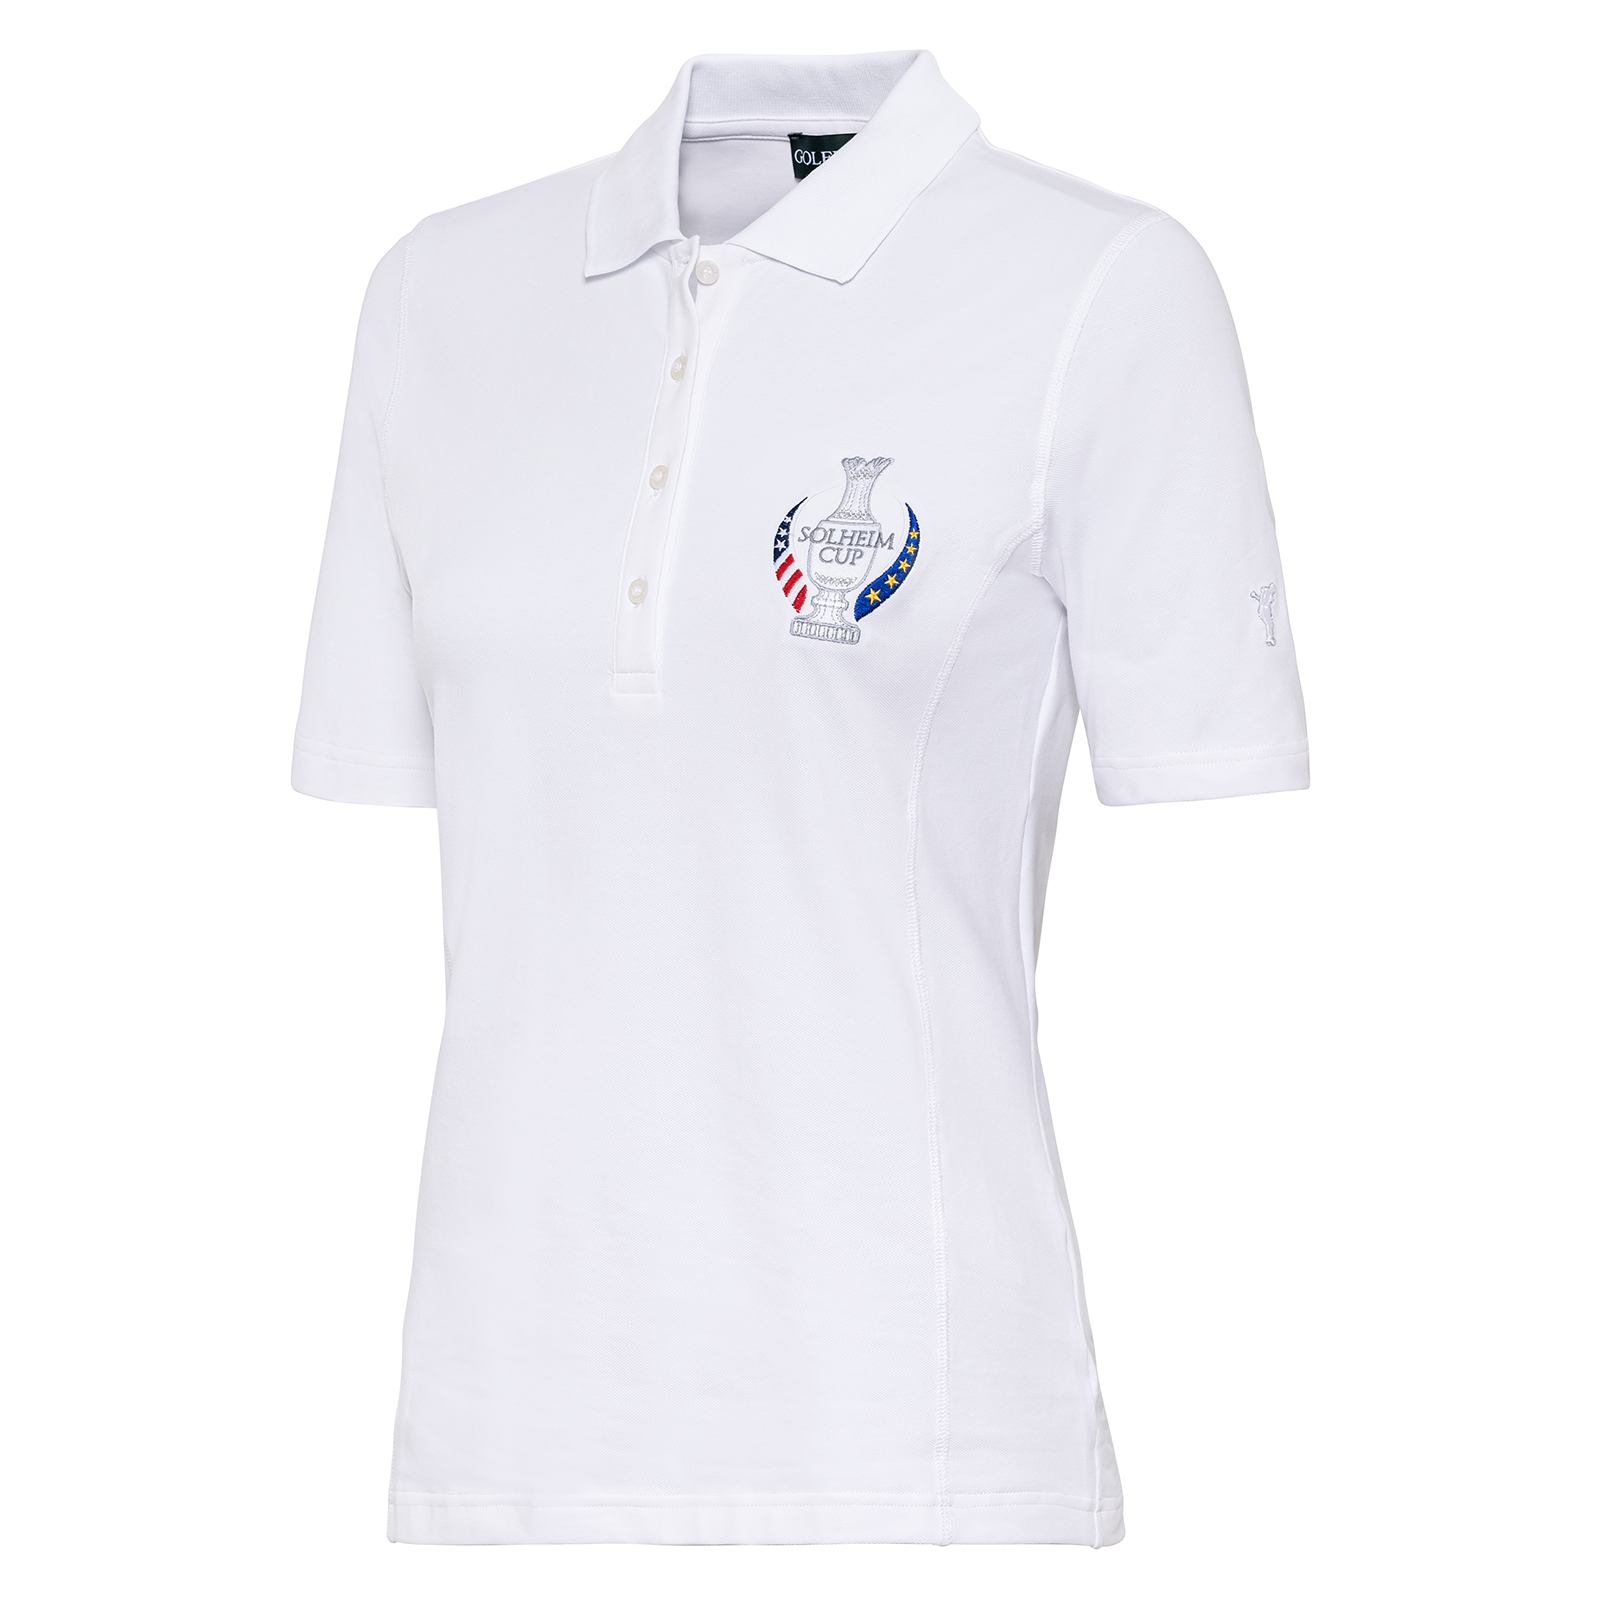 Ladies' polo shirt with ultraviolet protection in Solheim Cup design